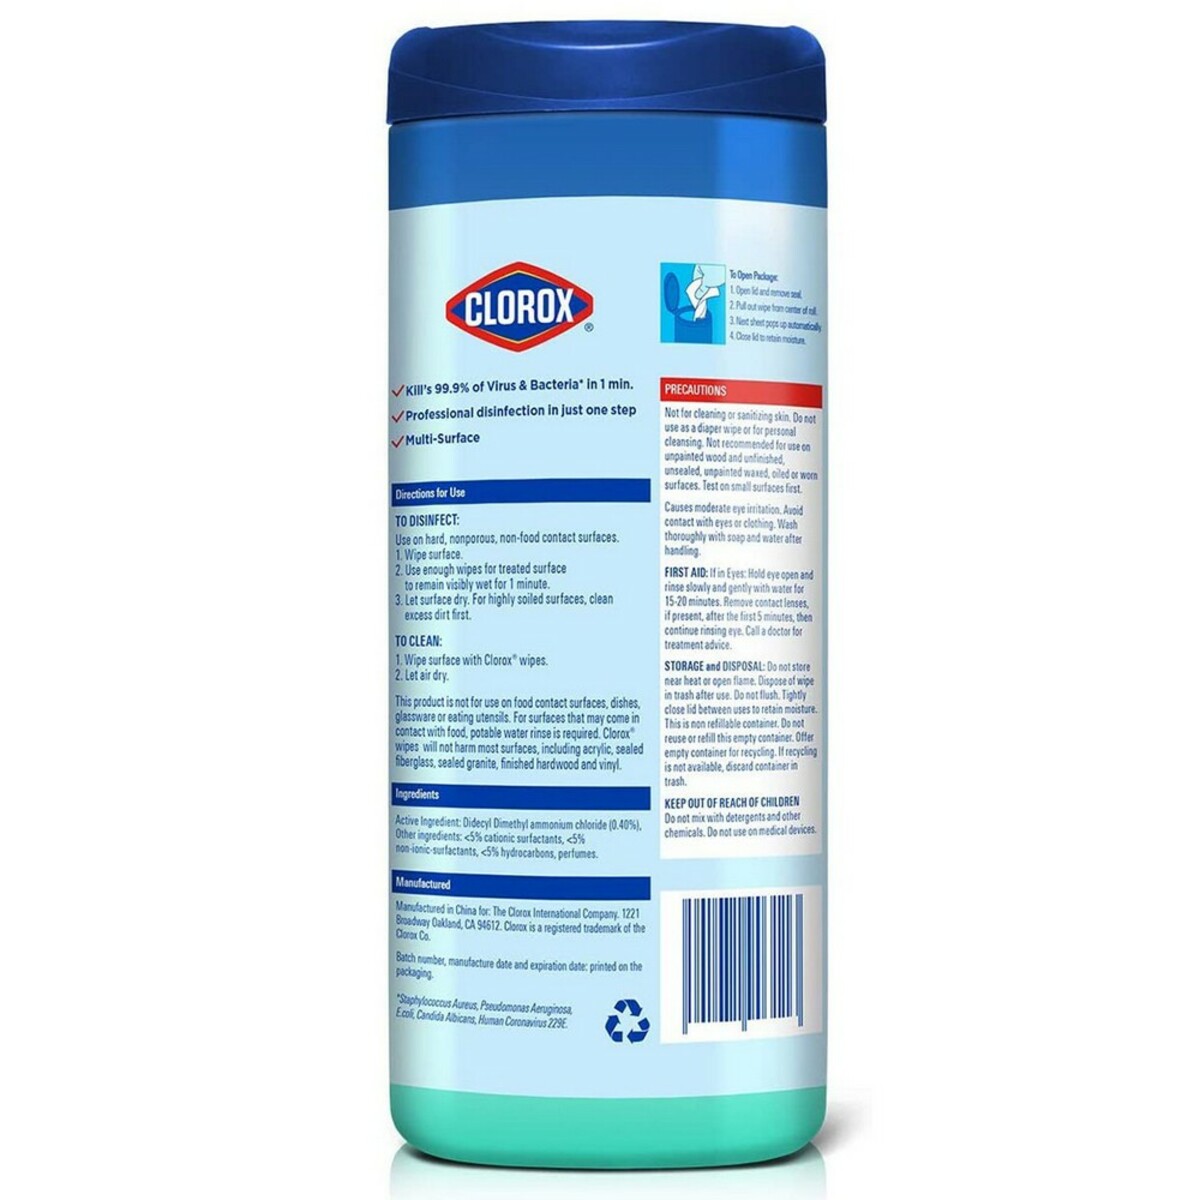 Clorox Expert Disinfecting Wipes Canister 30's